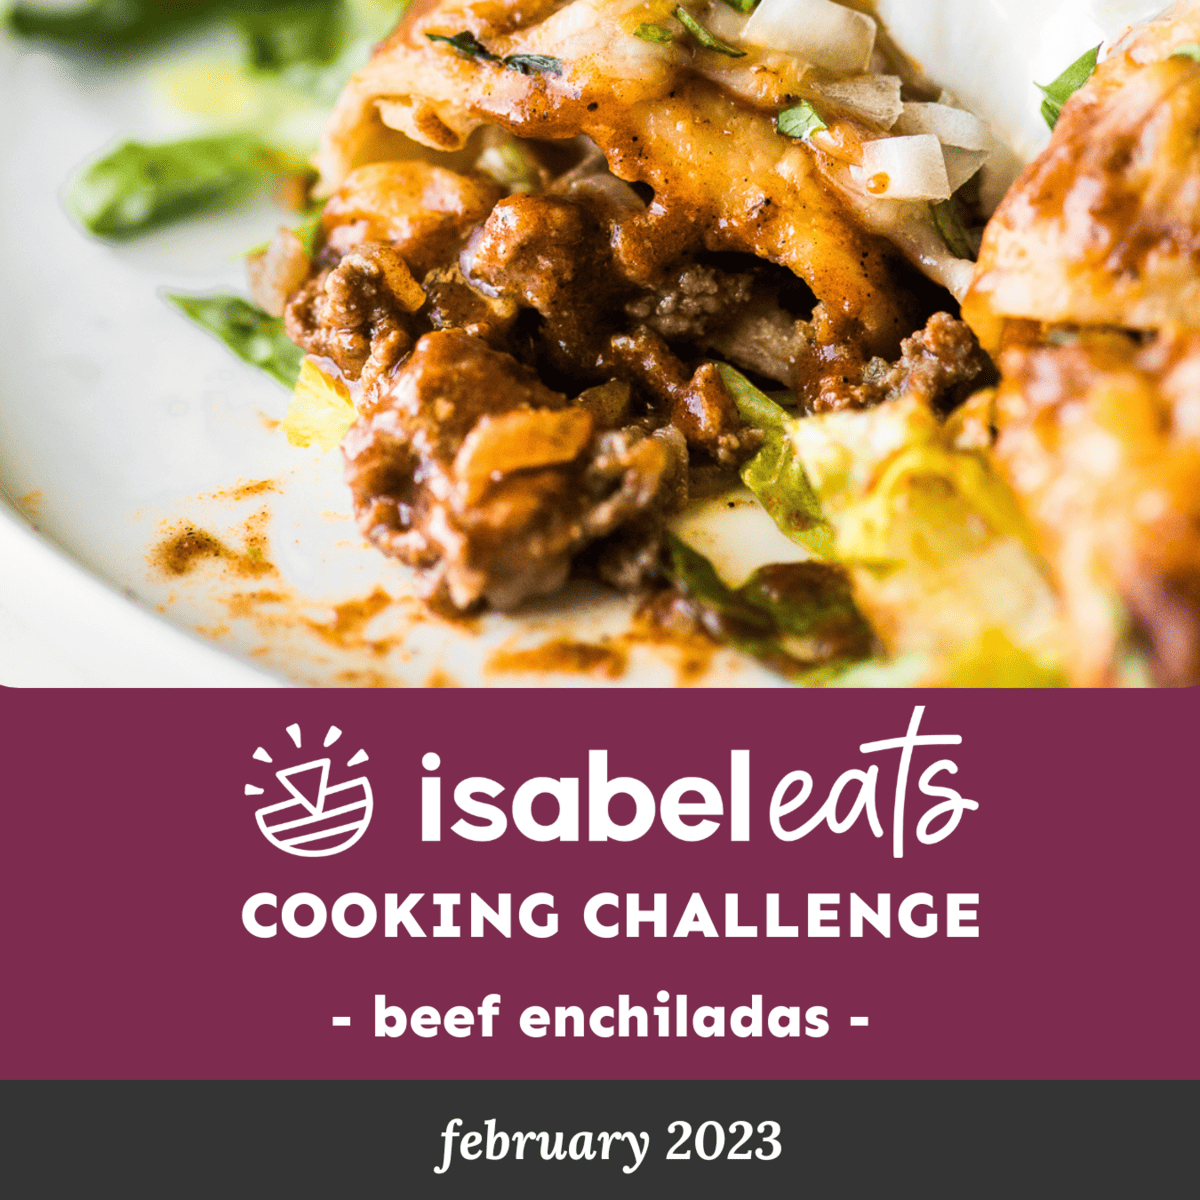 February 2023 Cooking Challenge